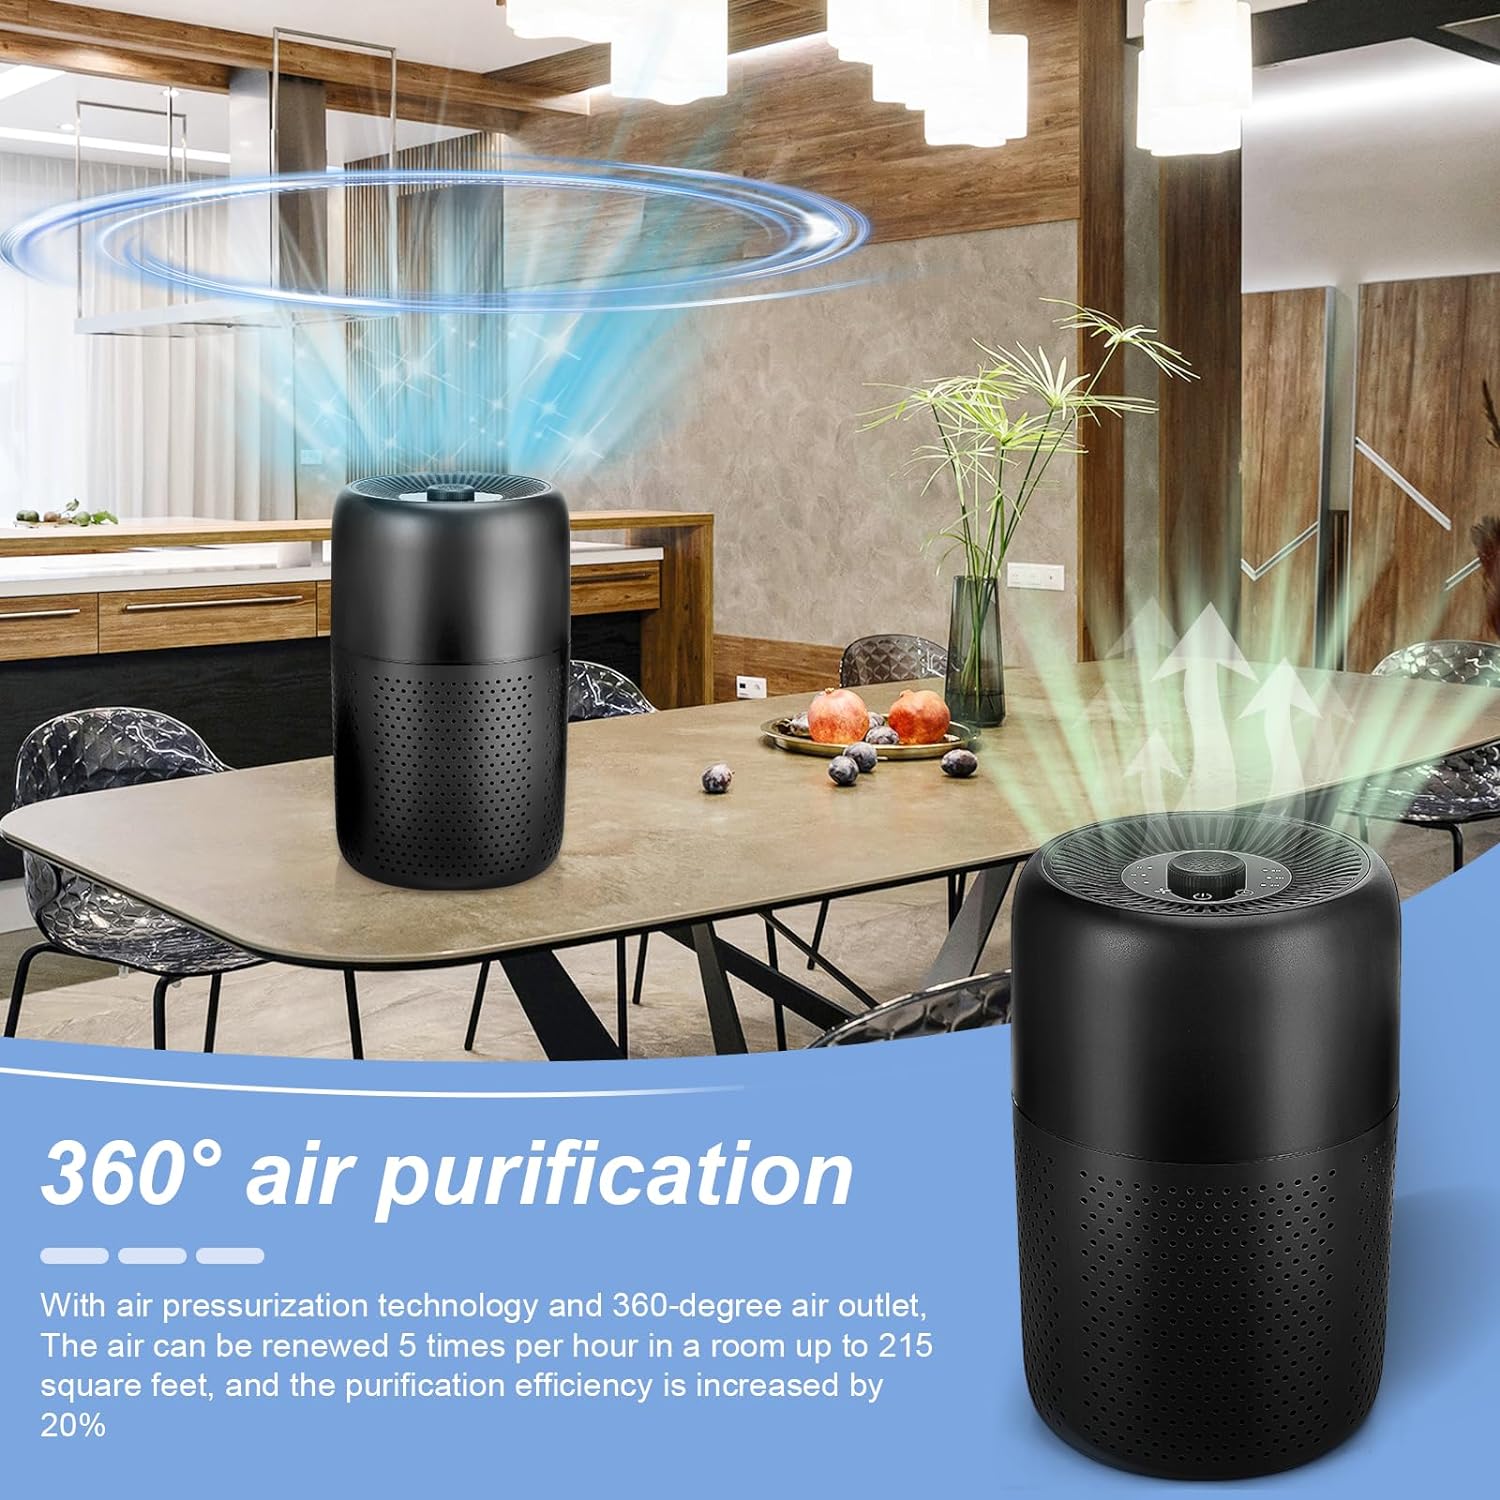 2 Pack TPLMB Air Purifiers for Bedroom,H13 HEPA Filters,Fragrance Sponge for Better Sleep,Remove 99.97% of Dust Smoke Hair Odors Wildfire Particles,24dB Filtration System, P60 Black.